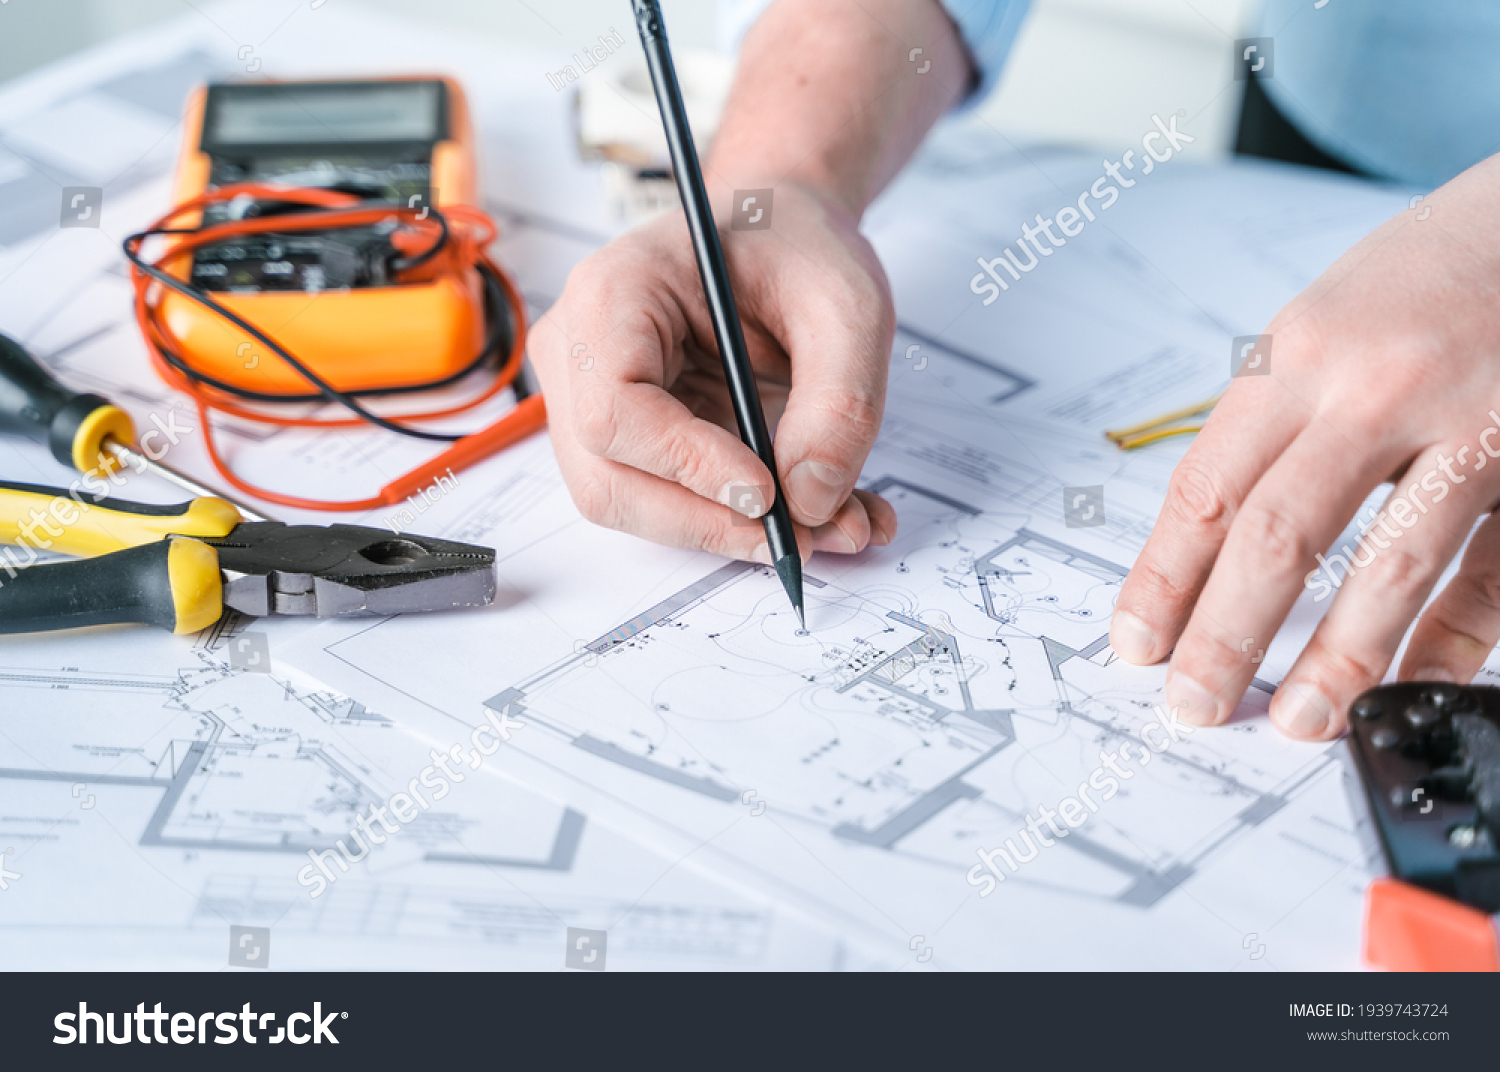 Man repairer making electricity project in house.Repairs planning.Drawing,diagrams,plan of electrification of apartment,building.Devices,accessories,voltmeter,wires,screwdriver,pliers and tape measure #1939743724